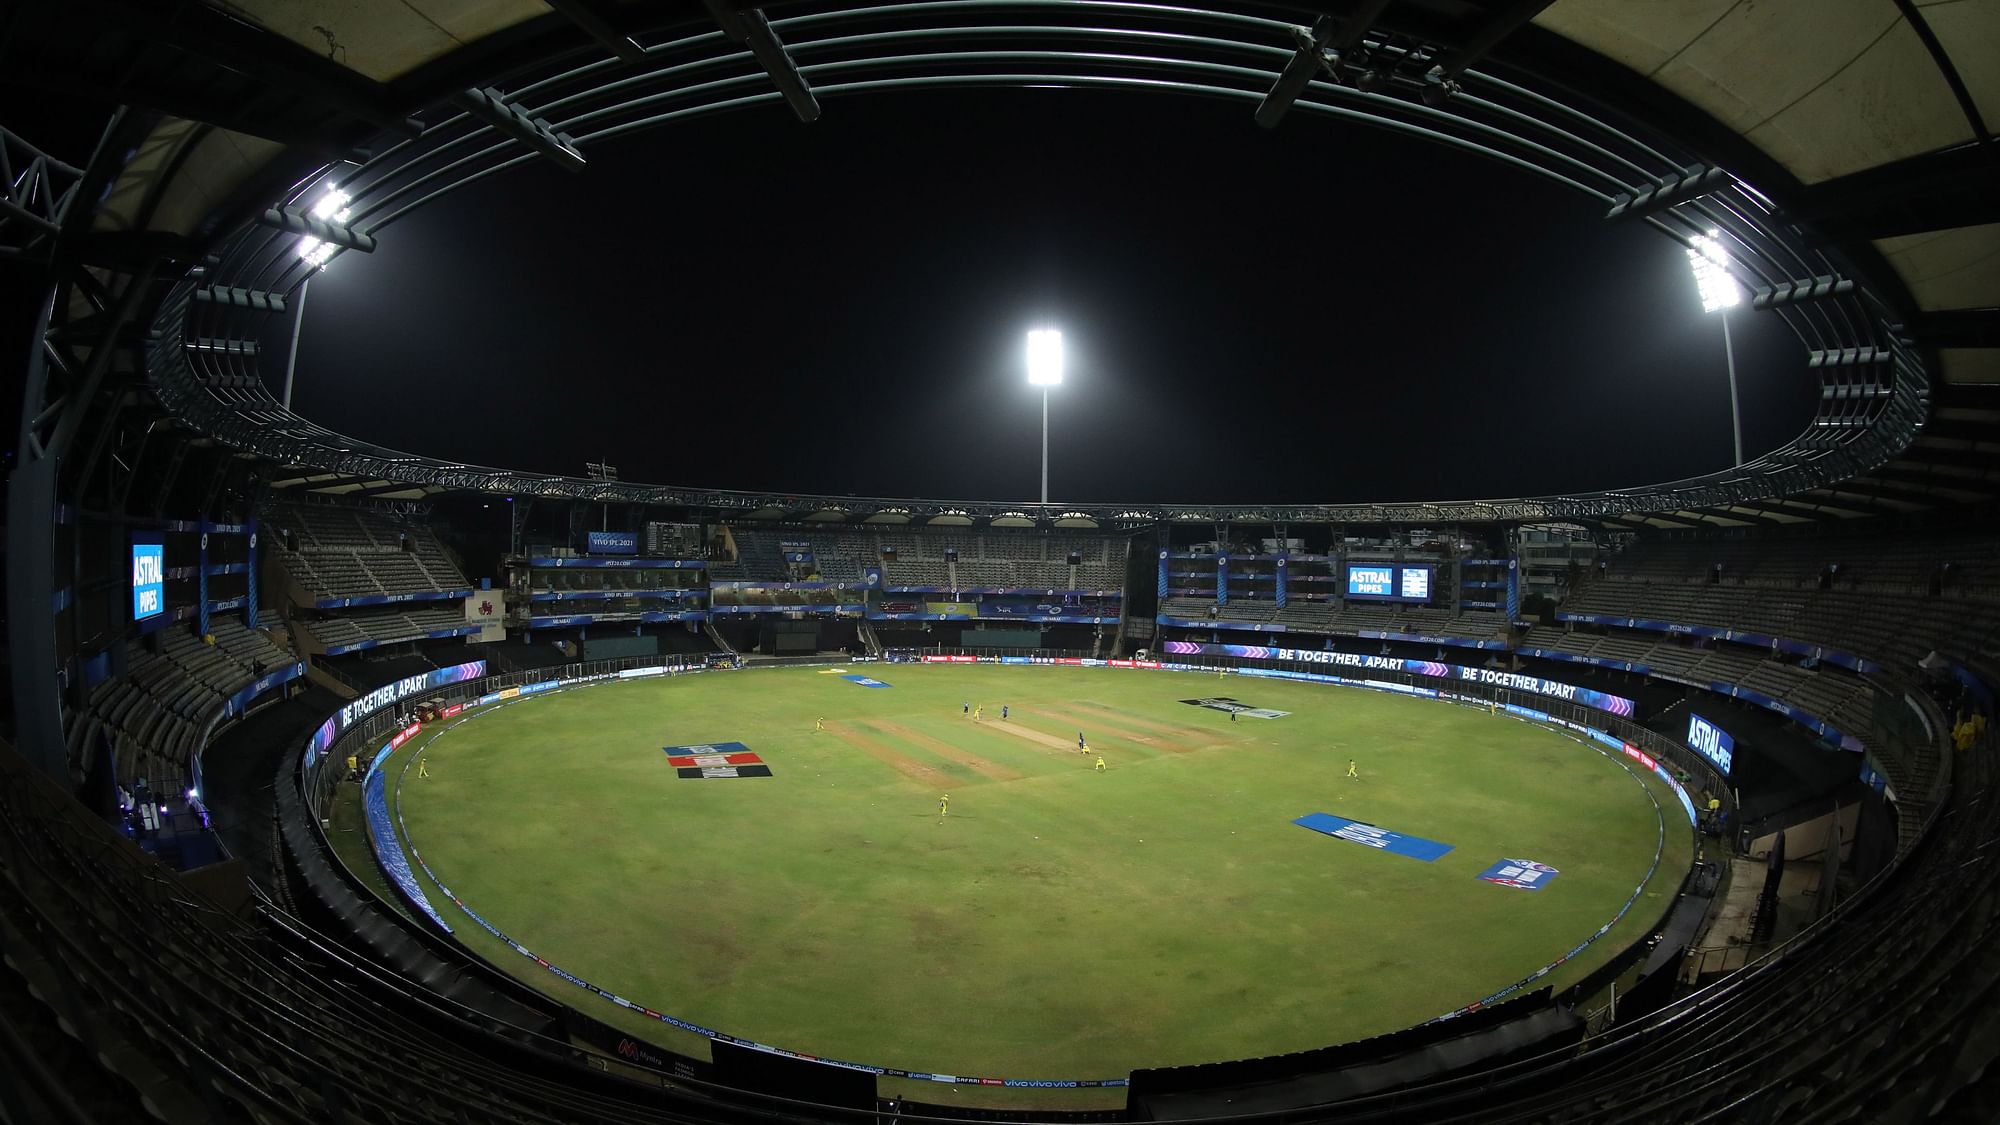 The BCCI has reportedly finalised the dates for the completion of the 2021 IPL season in the UAE.